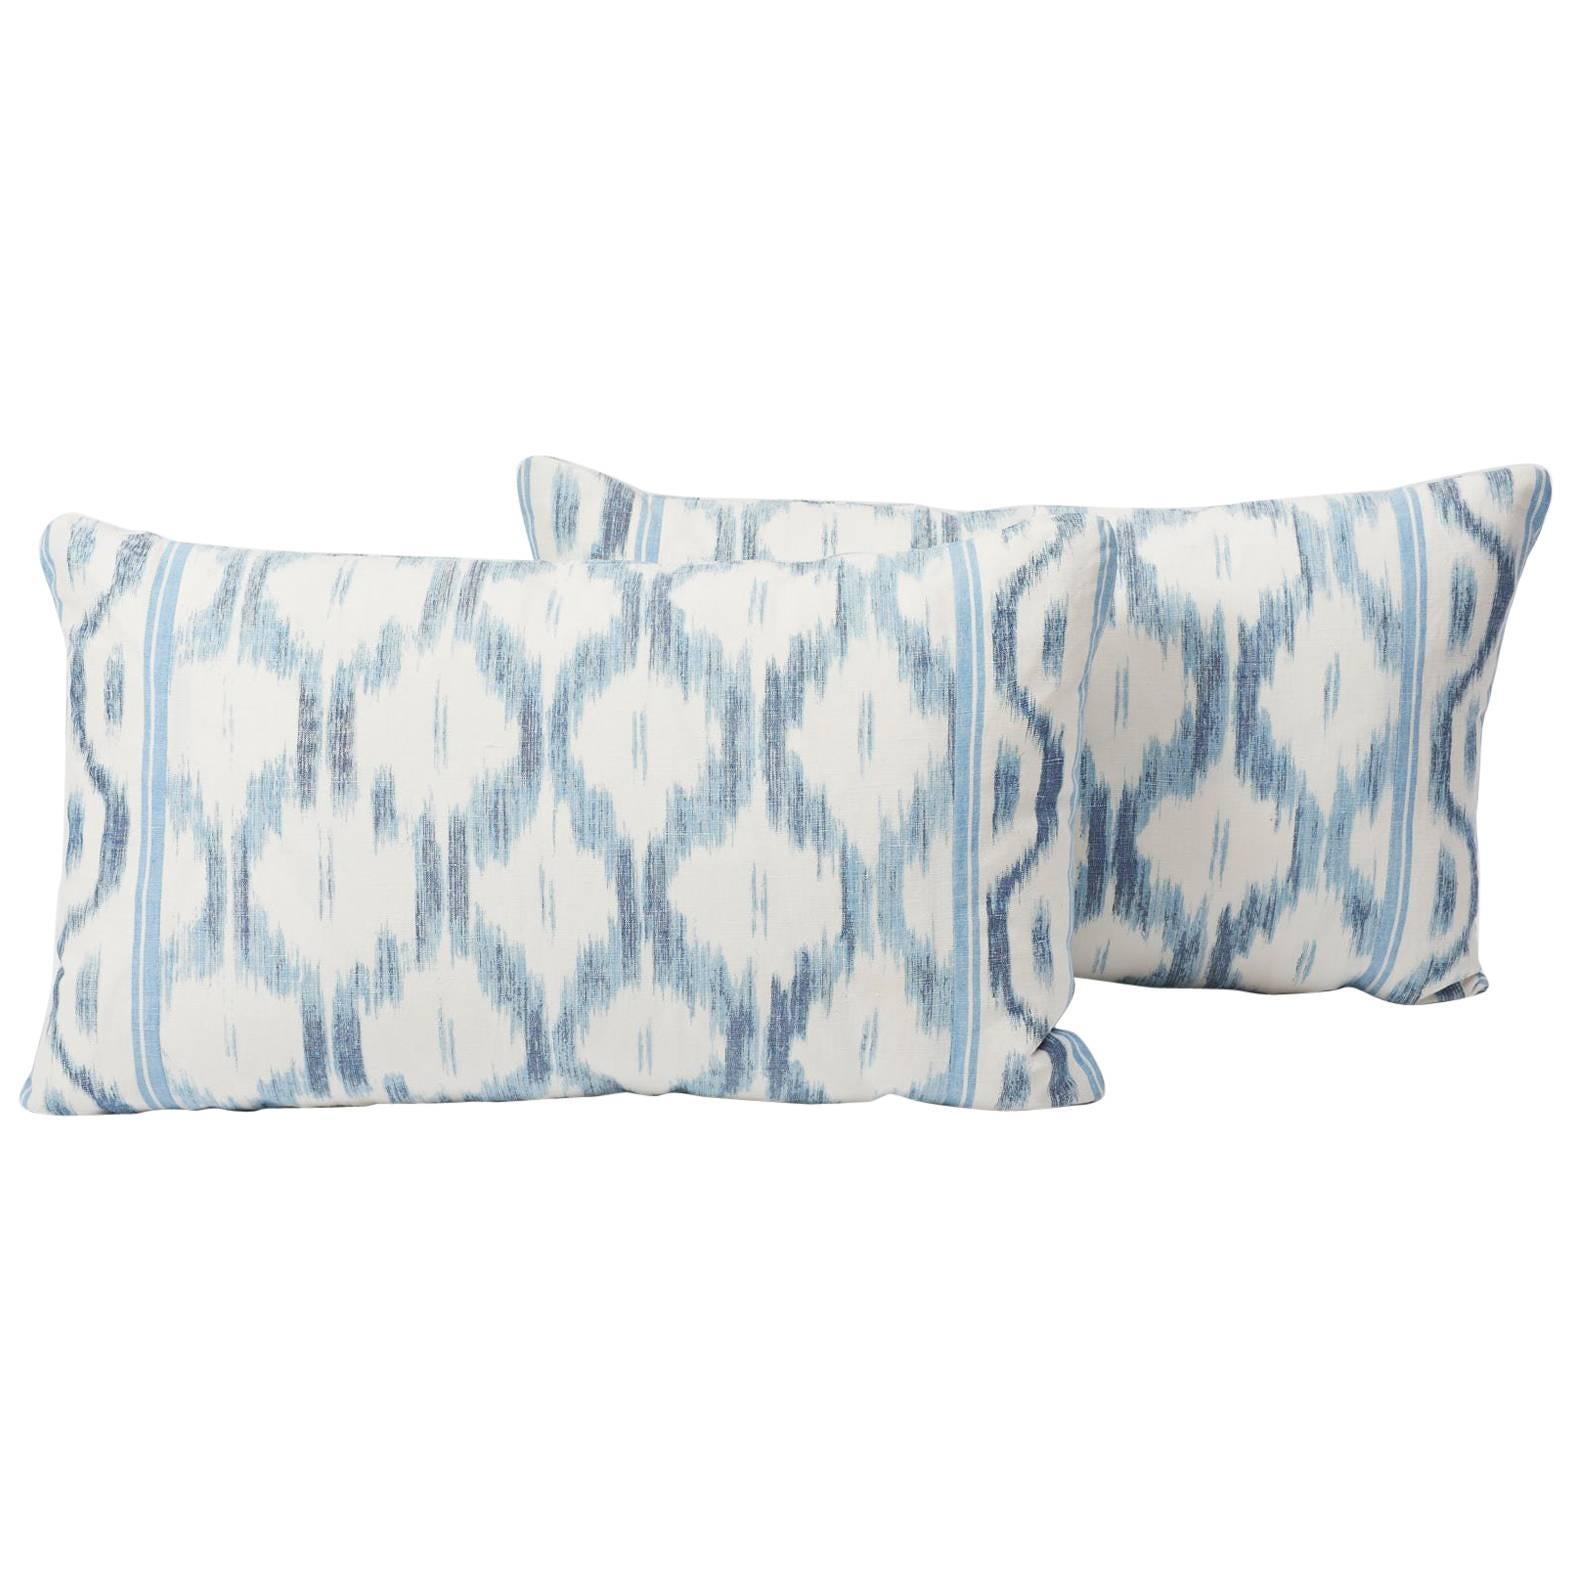 This artisanal crafted Schumacher pattern, in collaboration with Mark D. Sikes, puts a fresh spin on an archival ikat. Santa Monica Ikat's geometric design adds a modern and playful twist on this lumbar pillow. In this indigo color way, this